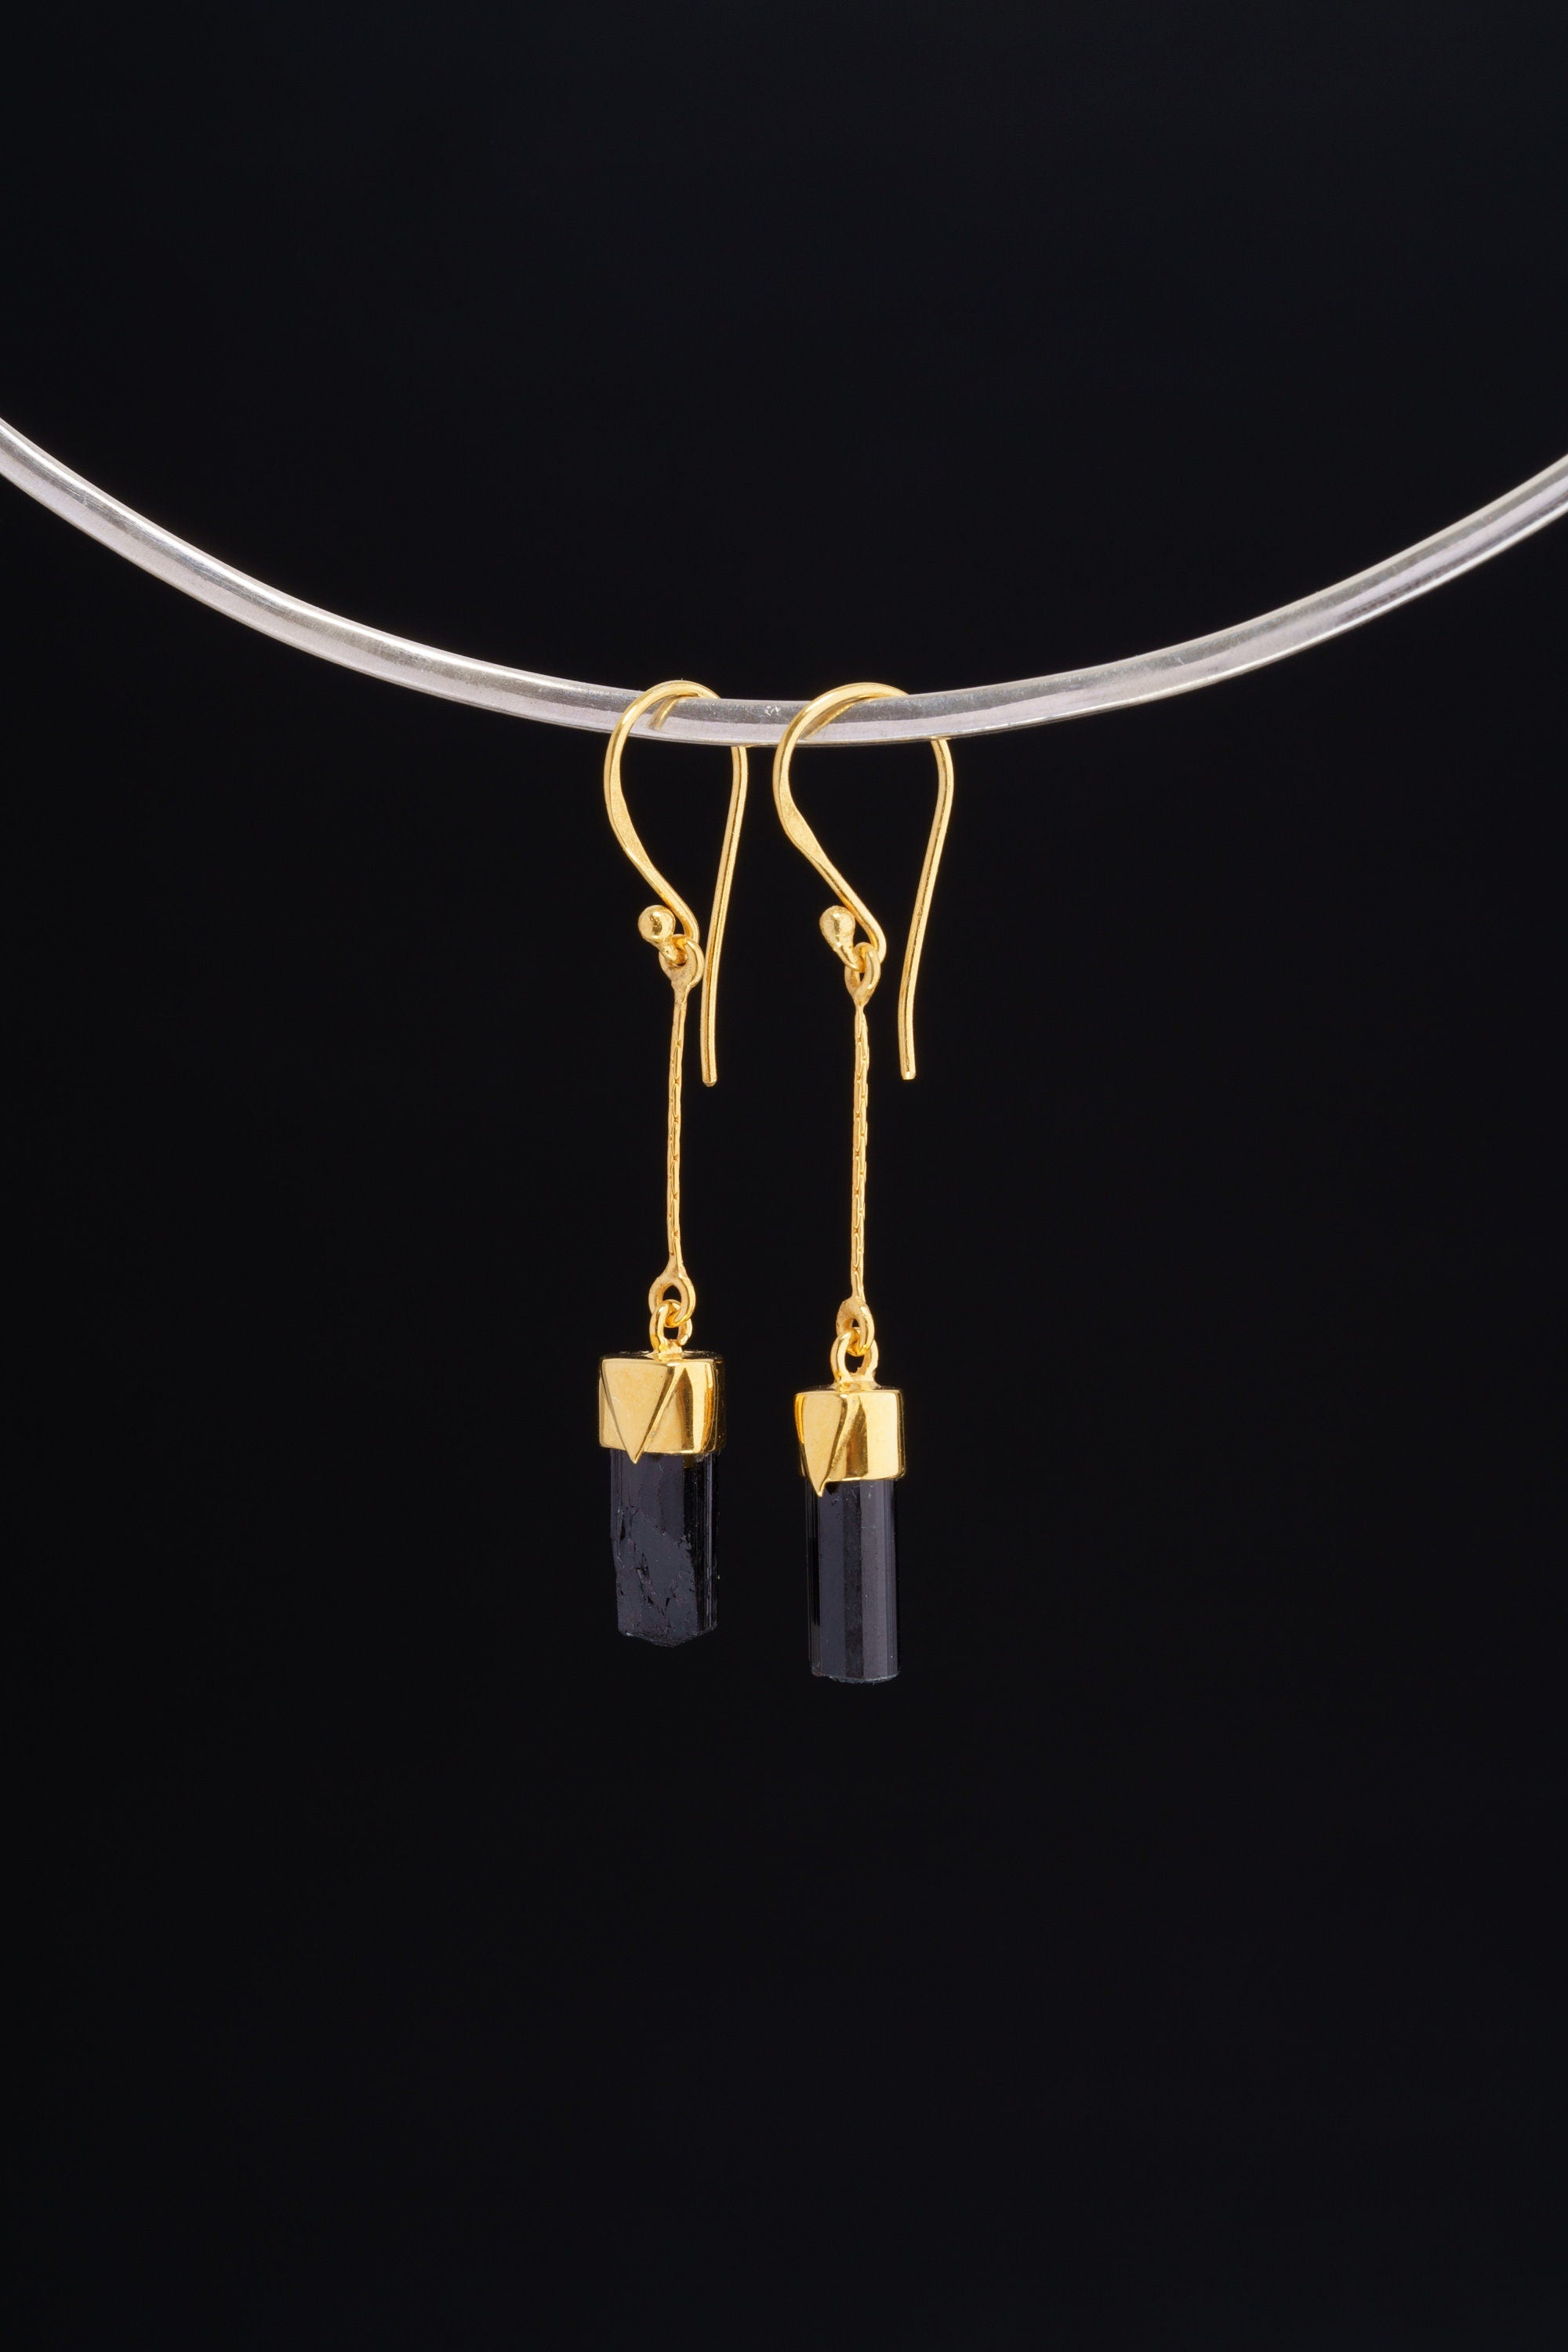 Raw Black Tourmaline Stick - Gold Plated Sterling - Silver Dangle Earring Pair